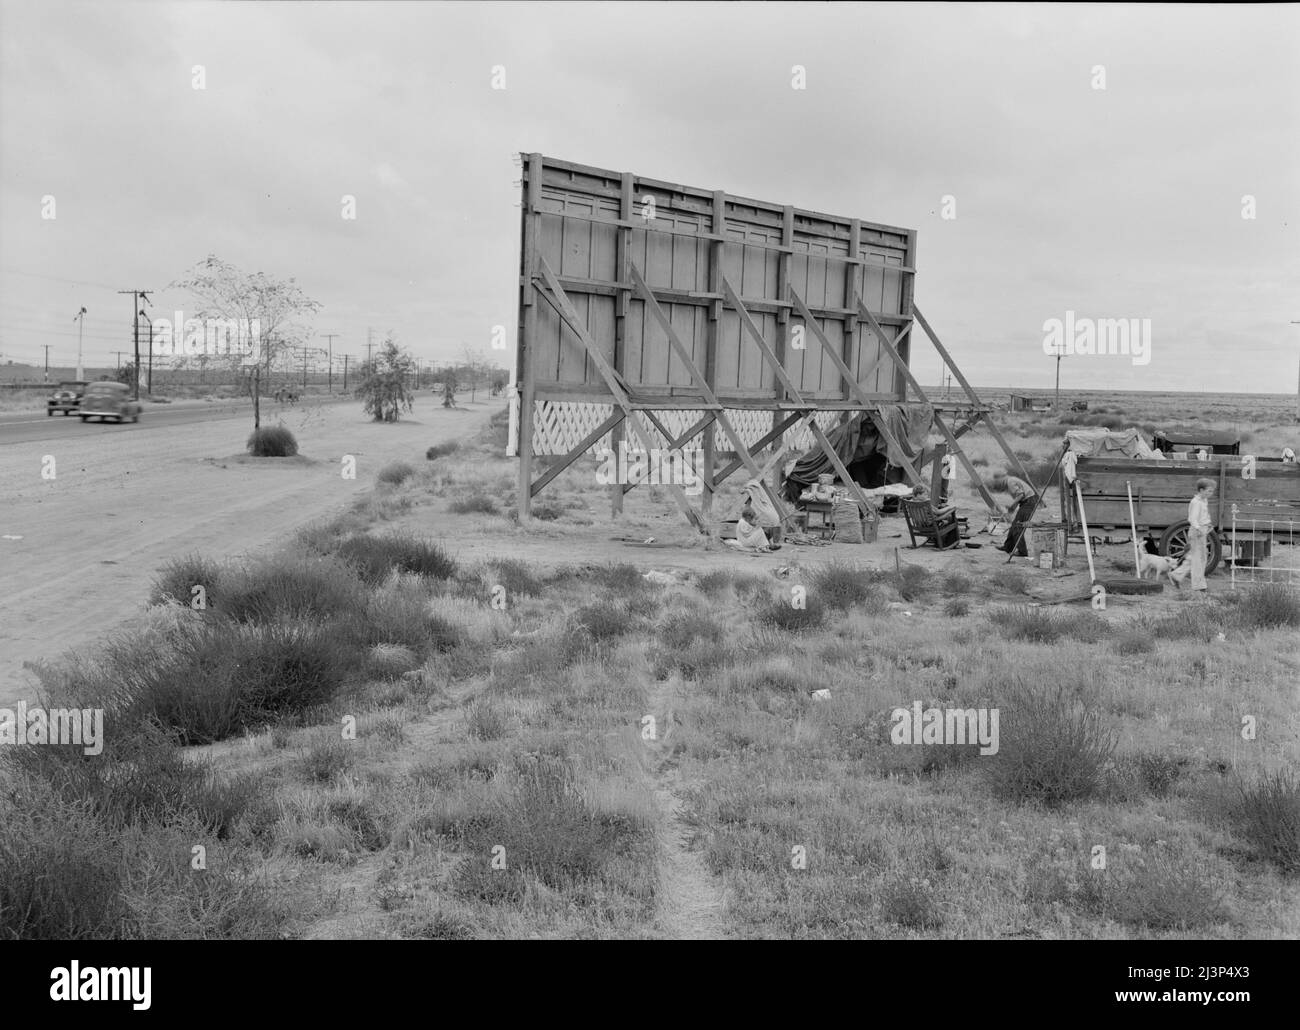 Three families camped on the plains along U.S. 99 in California. They are camped behind a billboard which serves as a partial windbreak. All are in need of work. Stock Photo